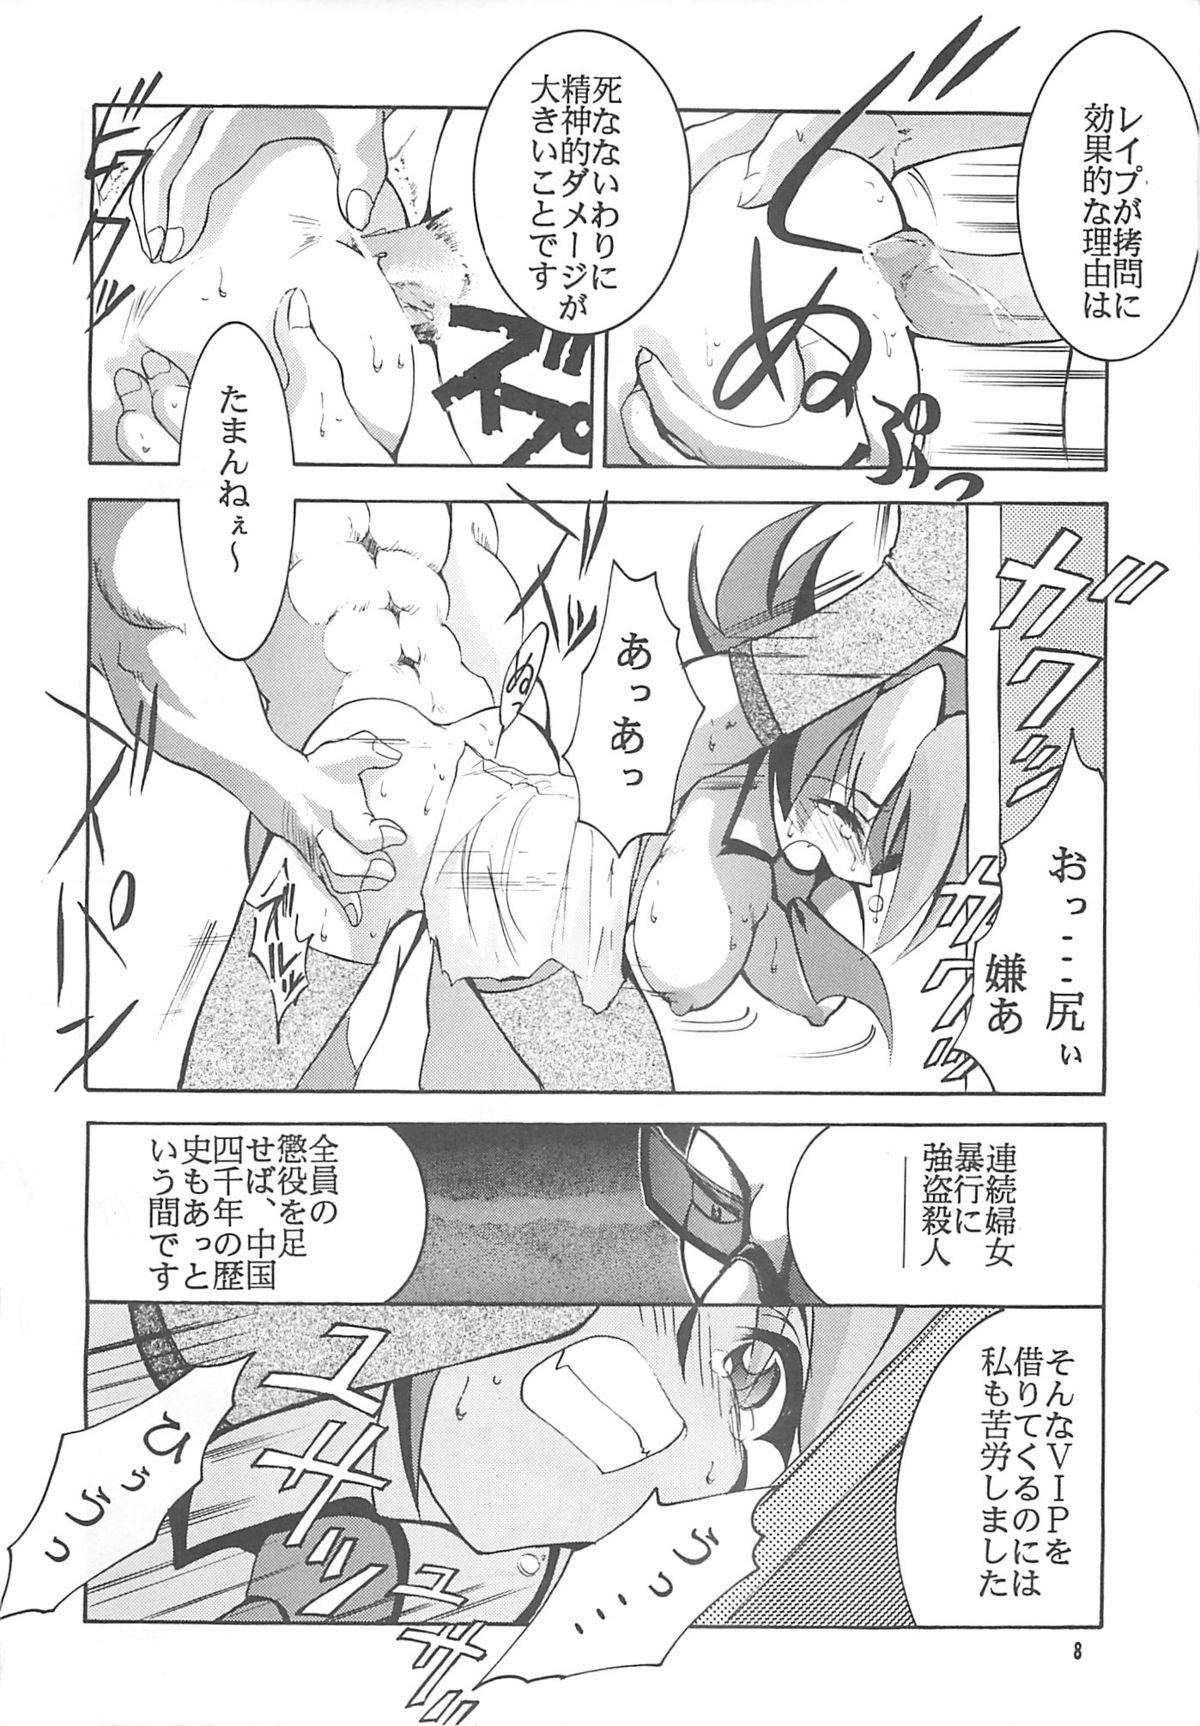 Calle TEN - Slayers Saber marionette Betterman Muscle - Page 7